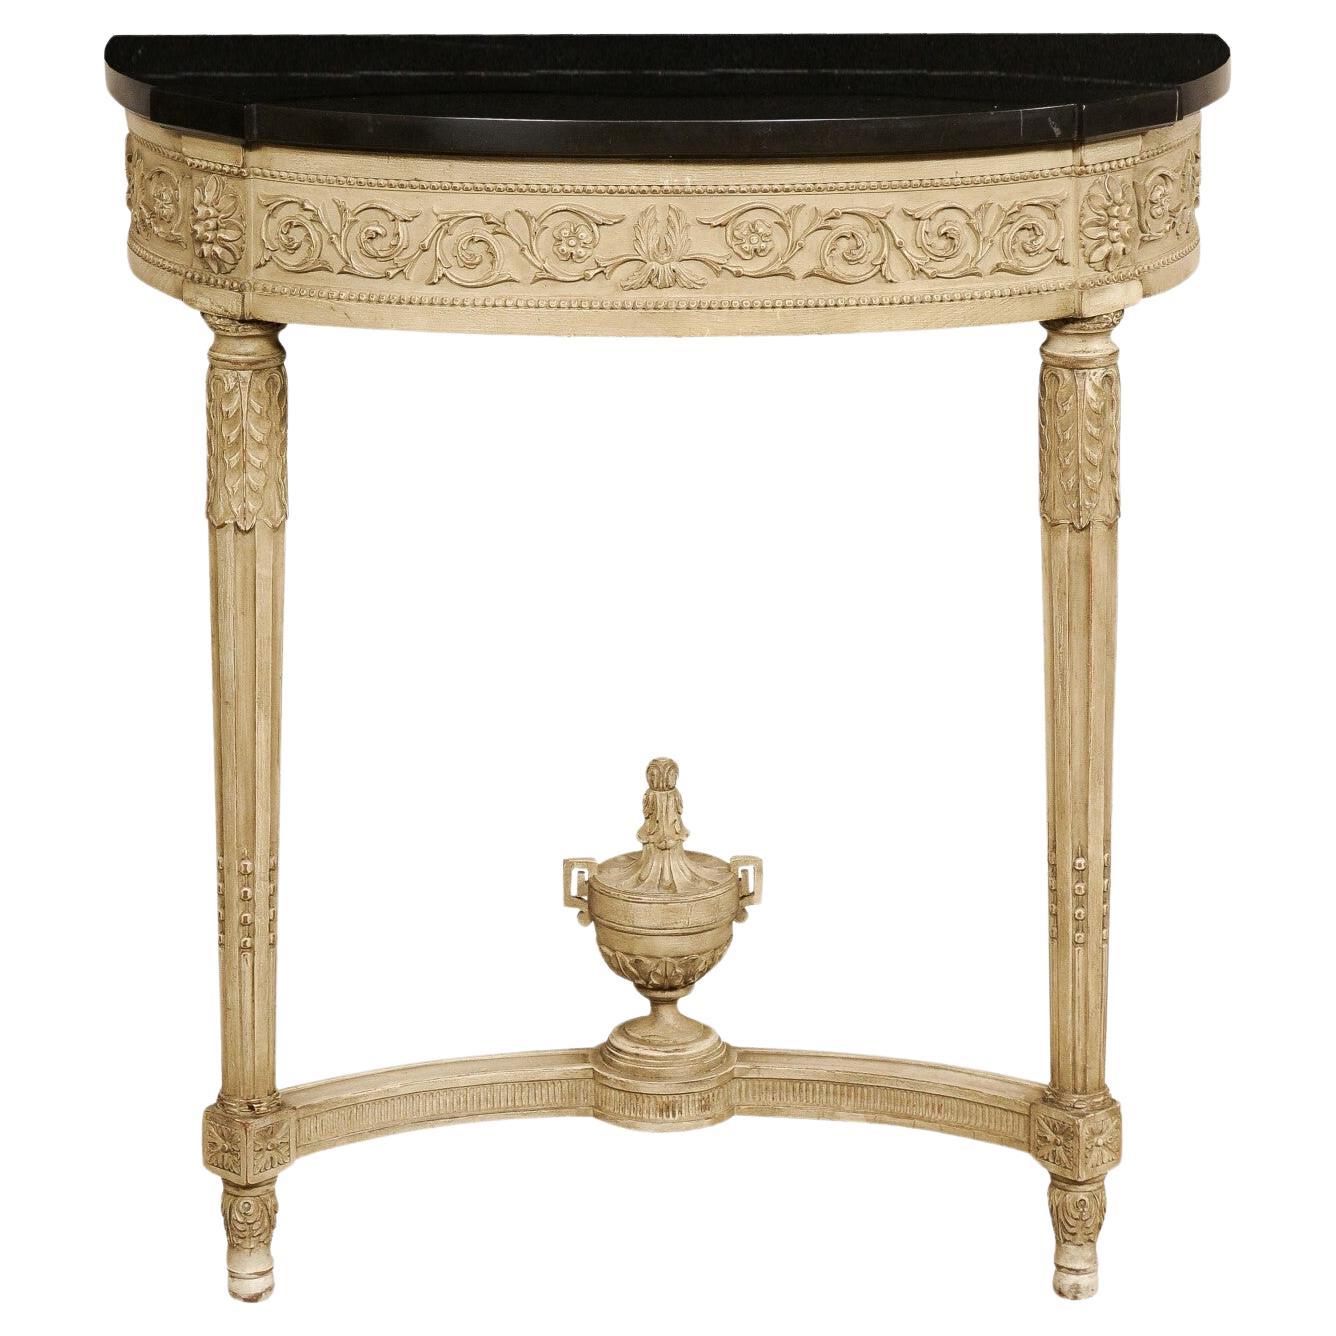 Petite French Neoclassic Wall Console w/Black Marble Top, Early 20th C.